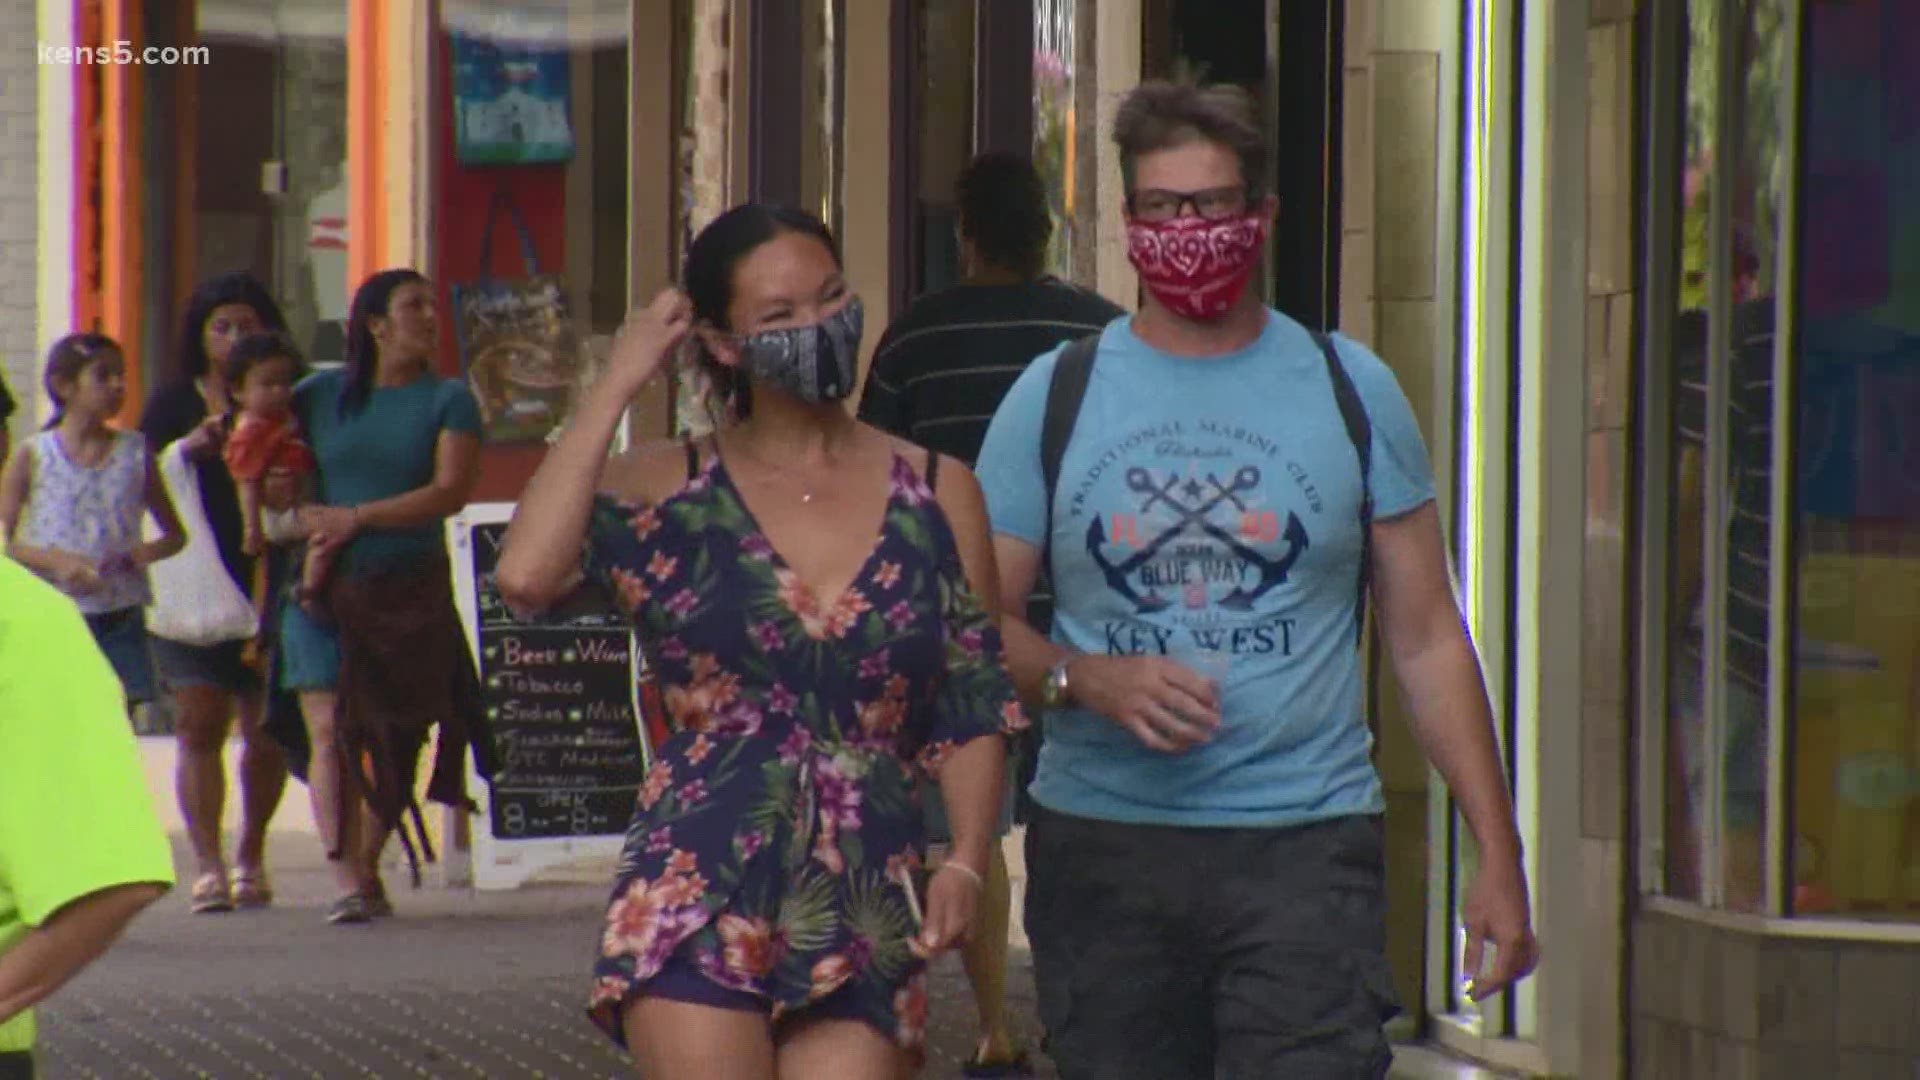 Raymond Vasquez said before he was showing symptoms he was out in public, and believes he saved hundreds of lives because he was wearing a mask.